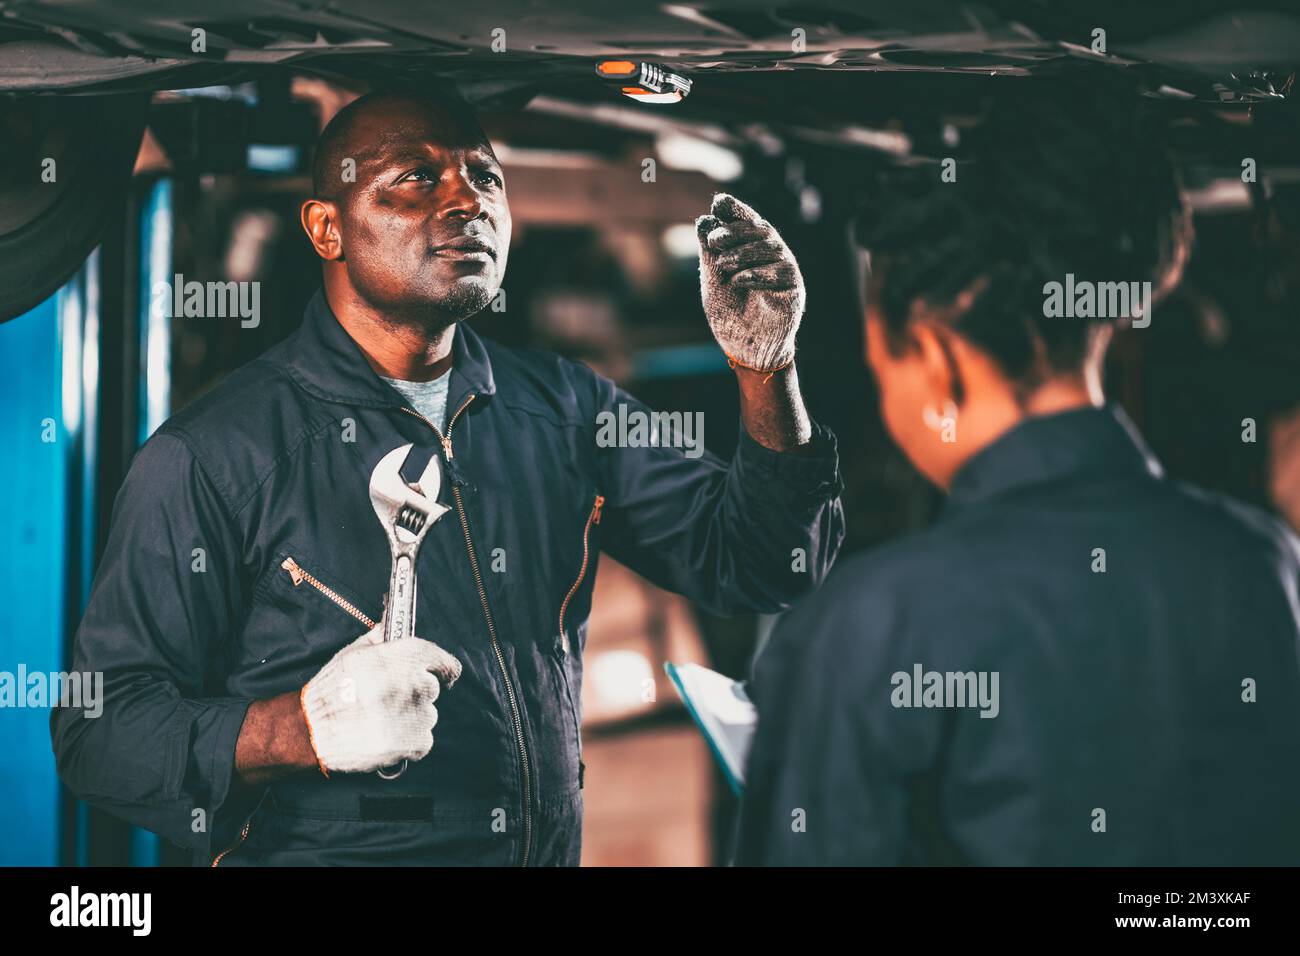 garage mechanic team working car auto service black african people professional worker together Stock Photo